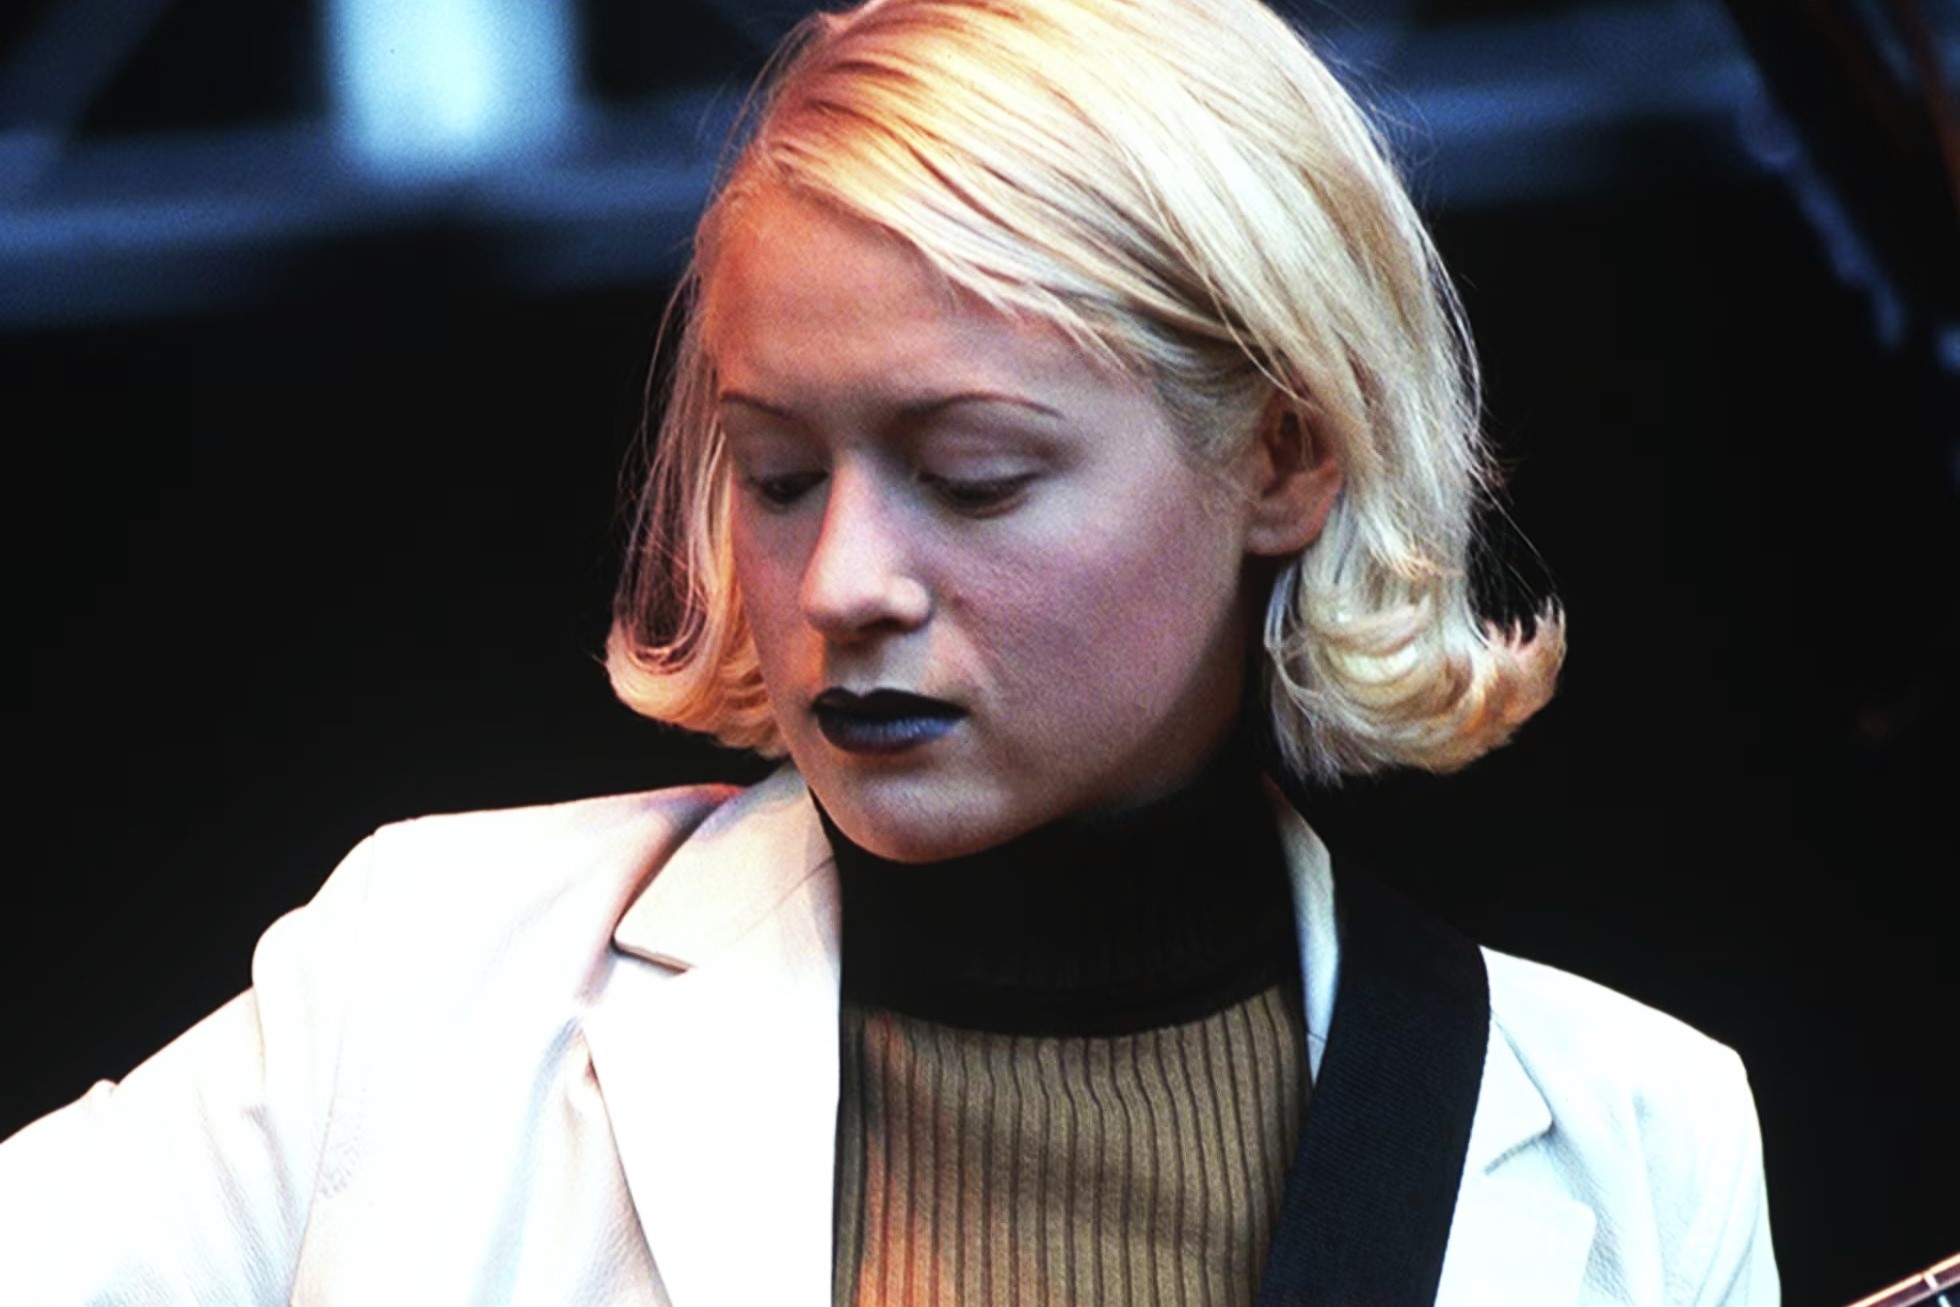 17 Fascinating Facts About D'arcy Wretzky - Facts.net